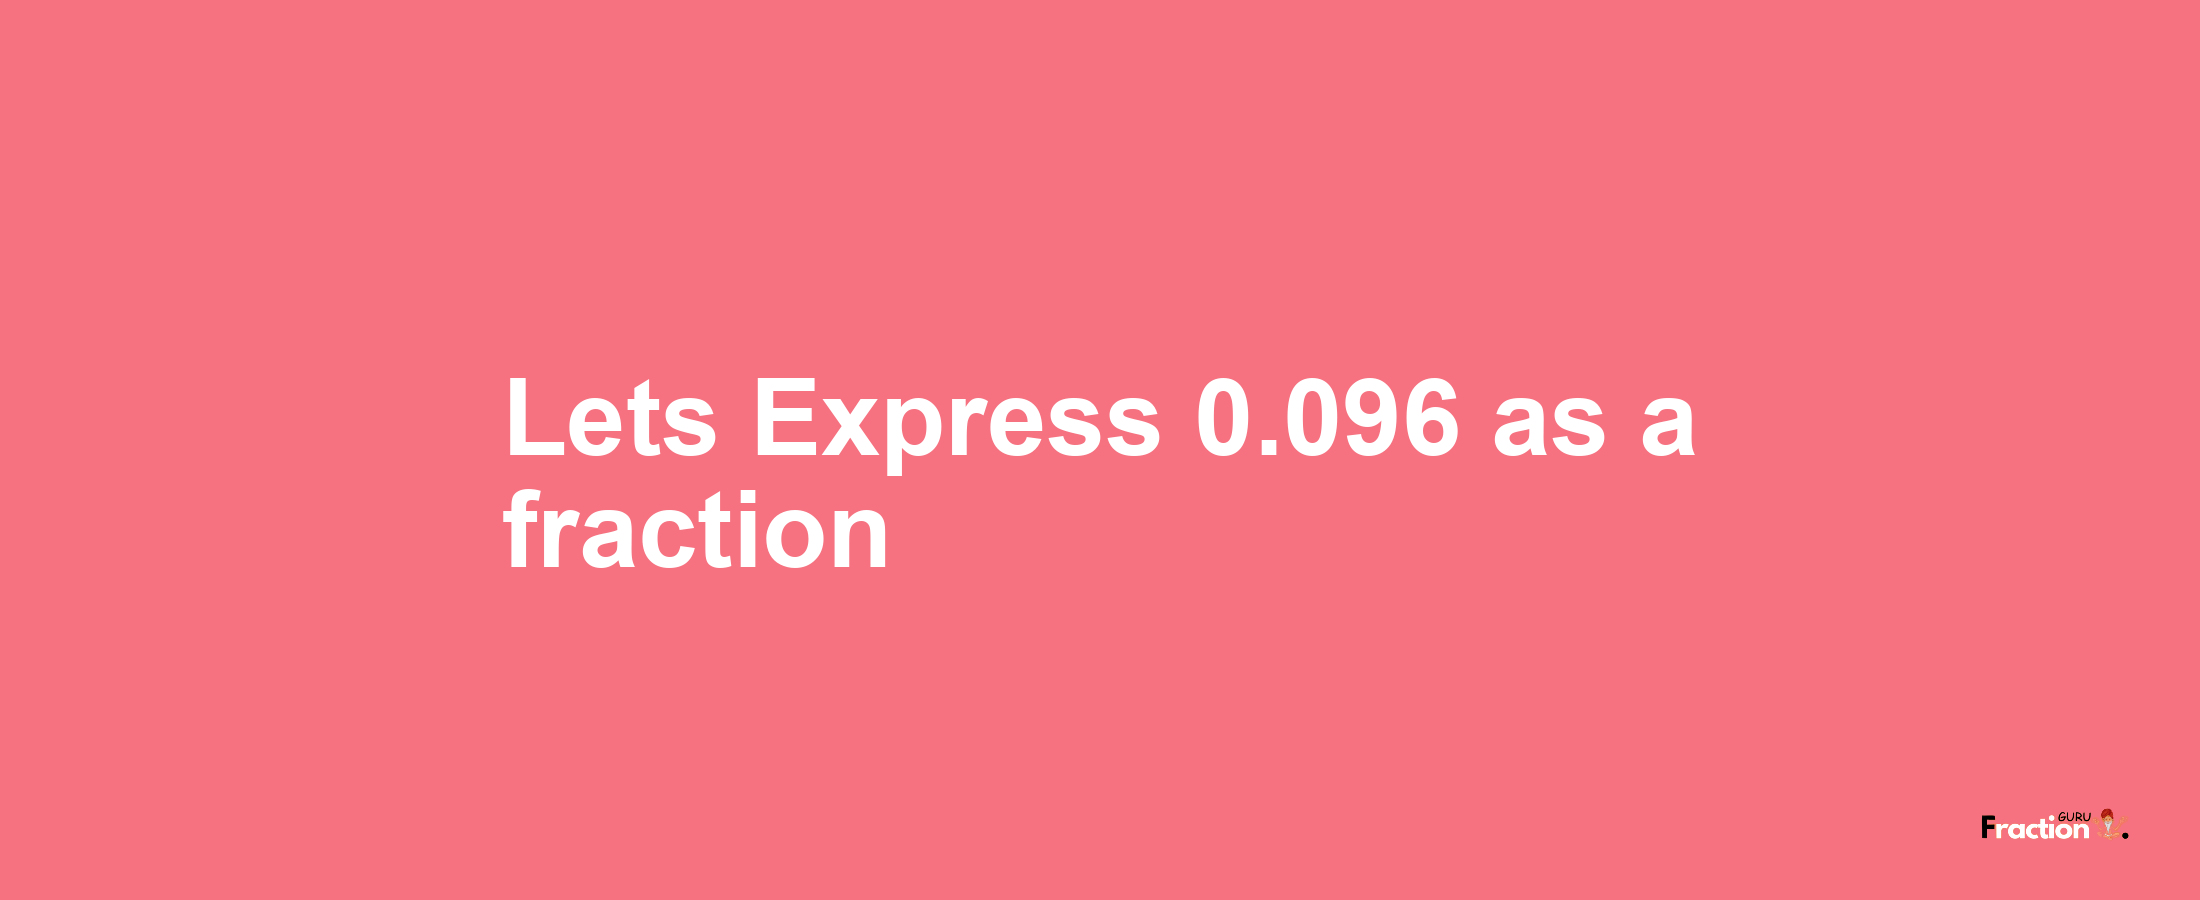 Lets Express 0.096 as afraction